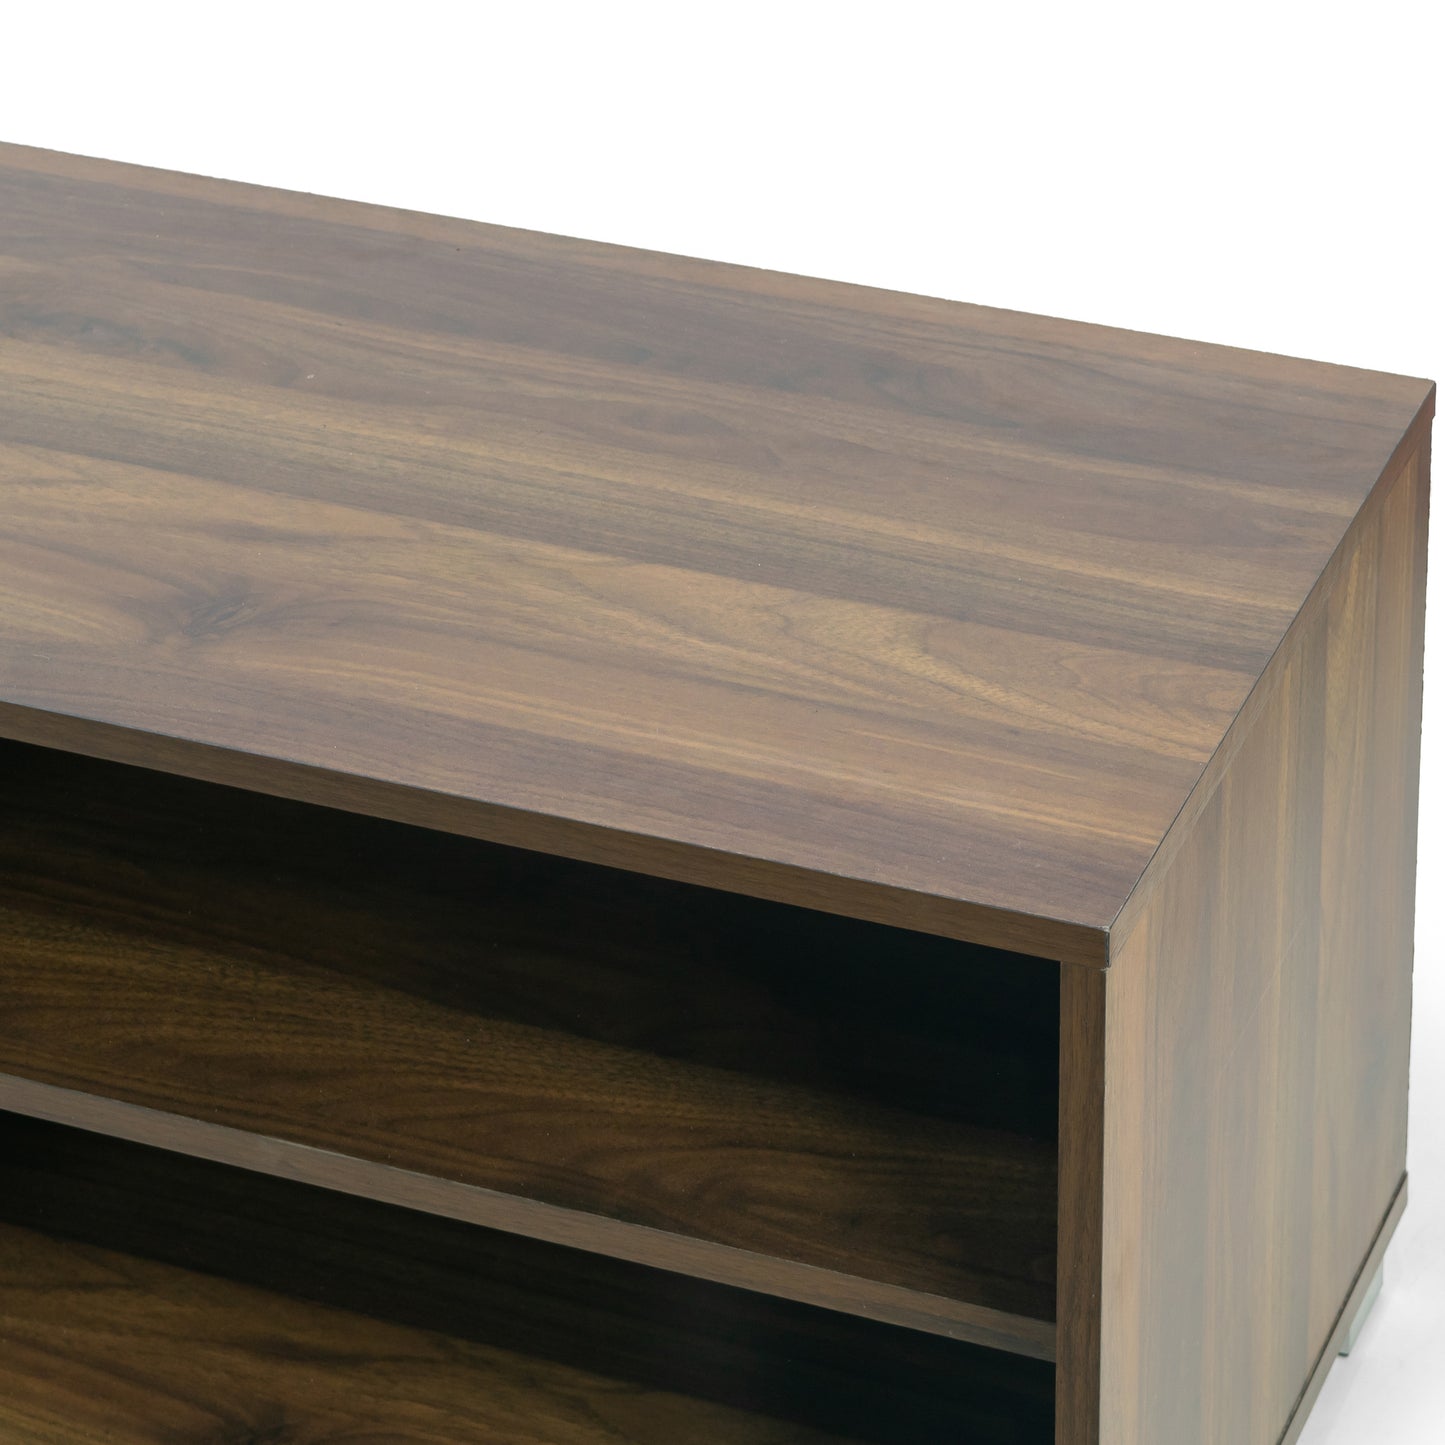 Anne TV Stand Walnut Finish with Contrasting White Door